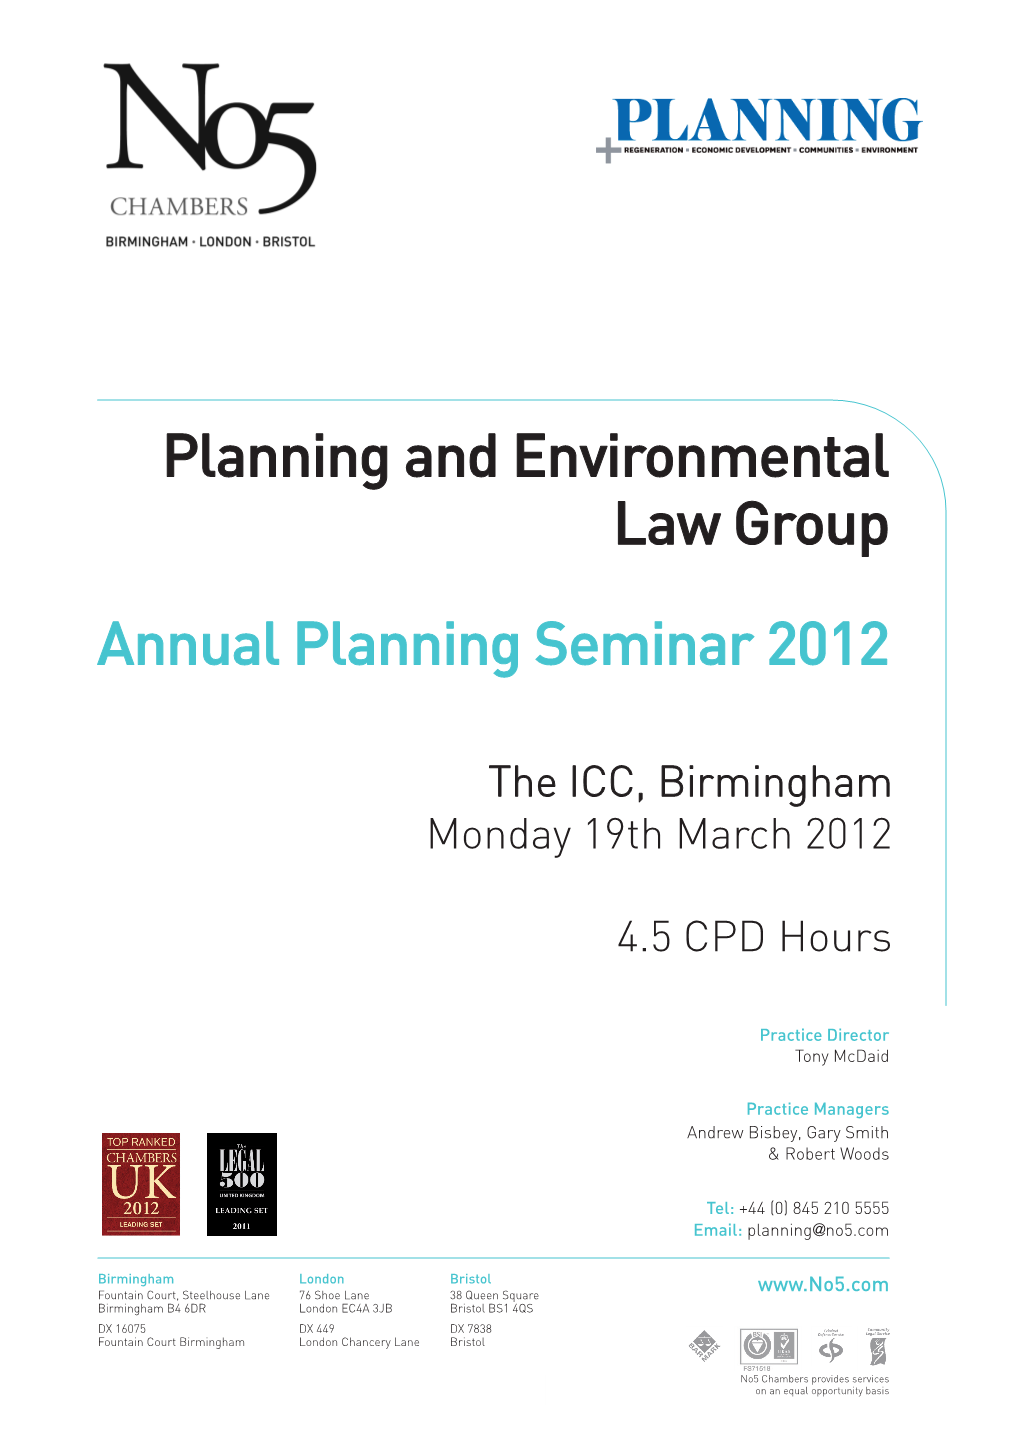 Planning and Environmental Law Group Annual Planning Seminar